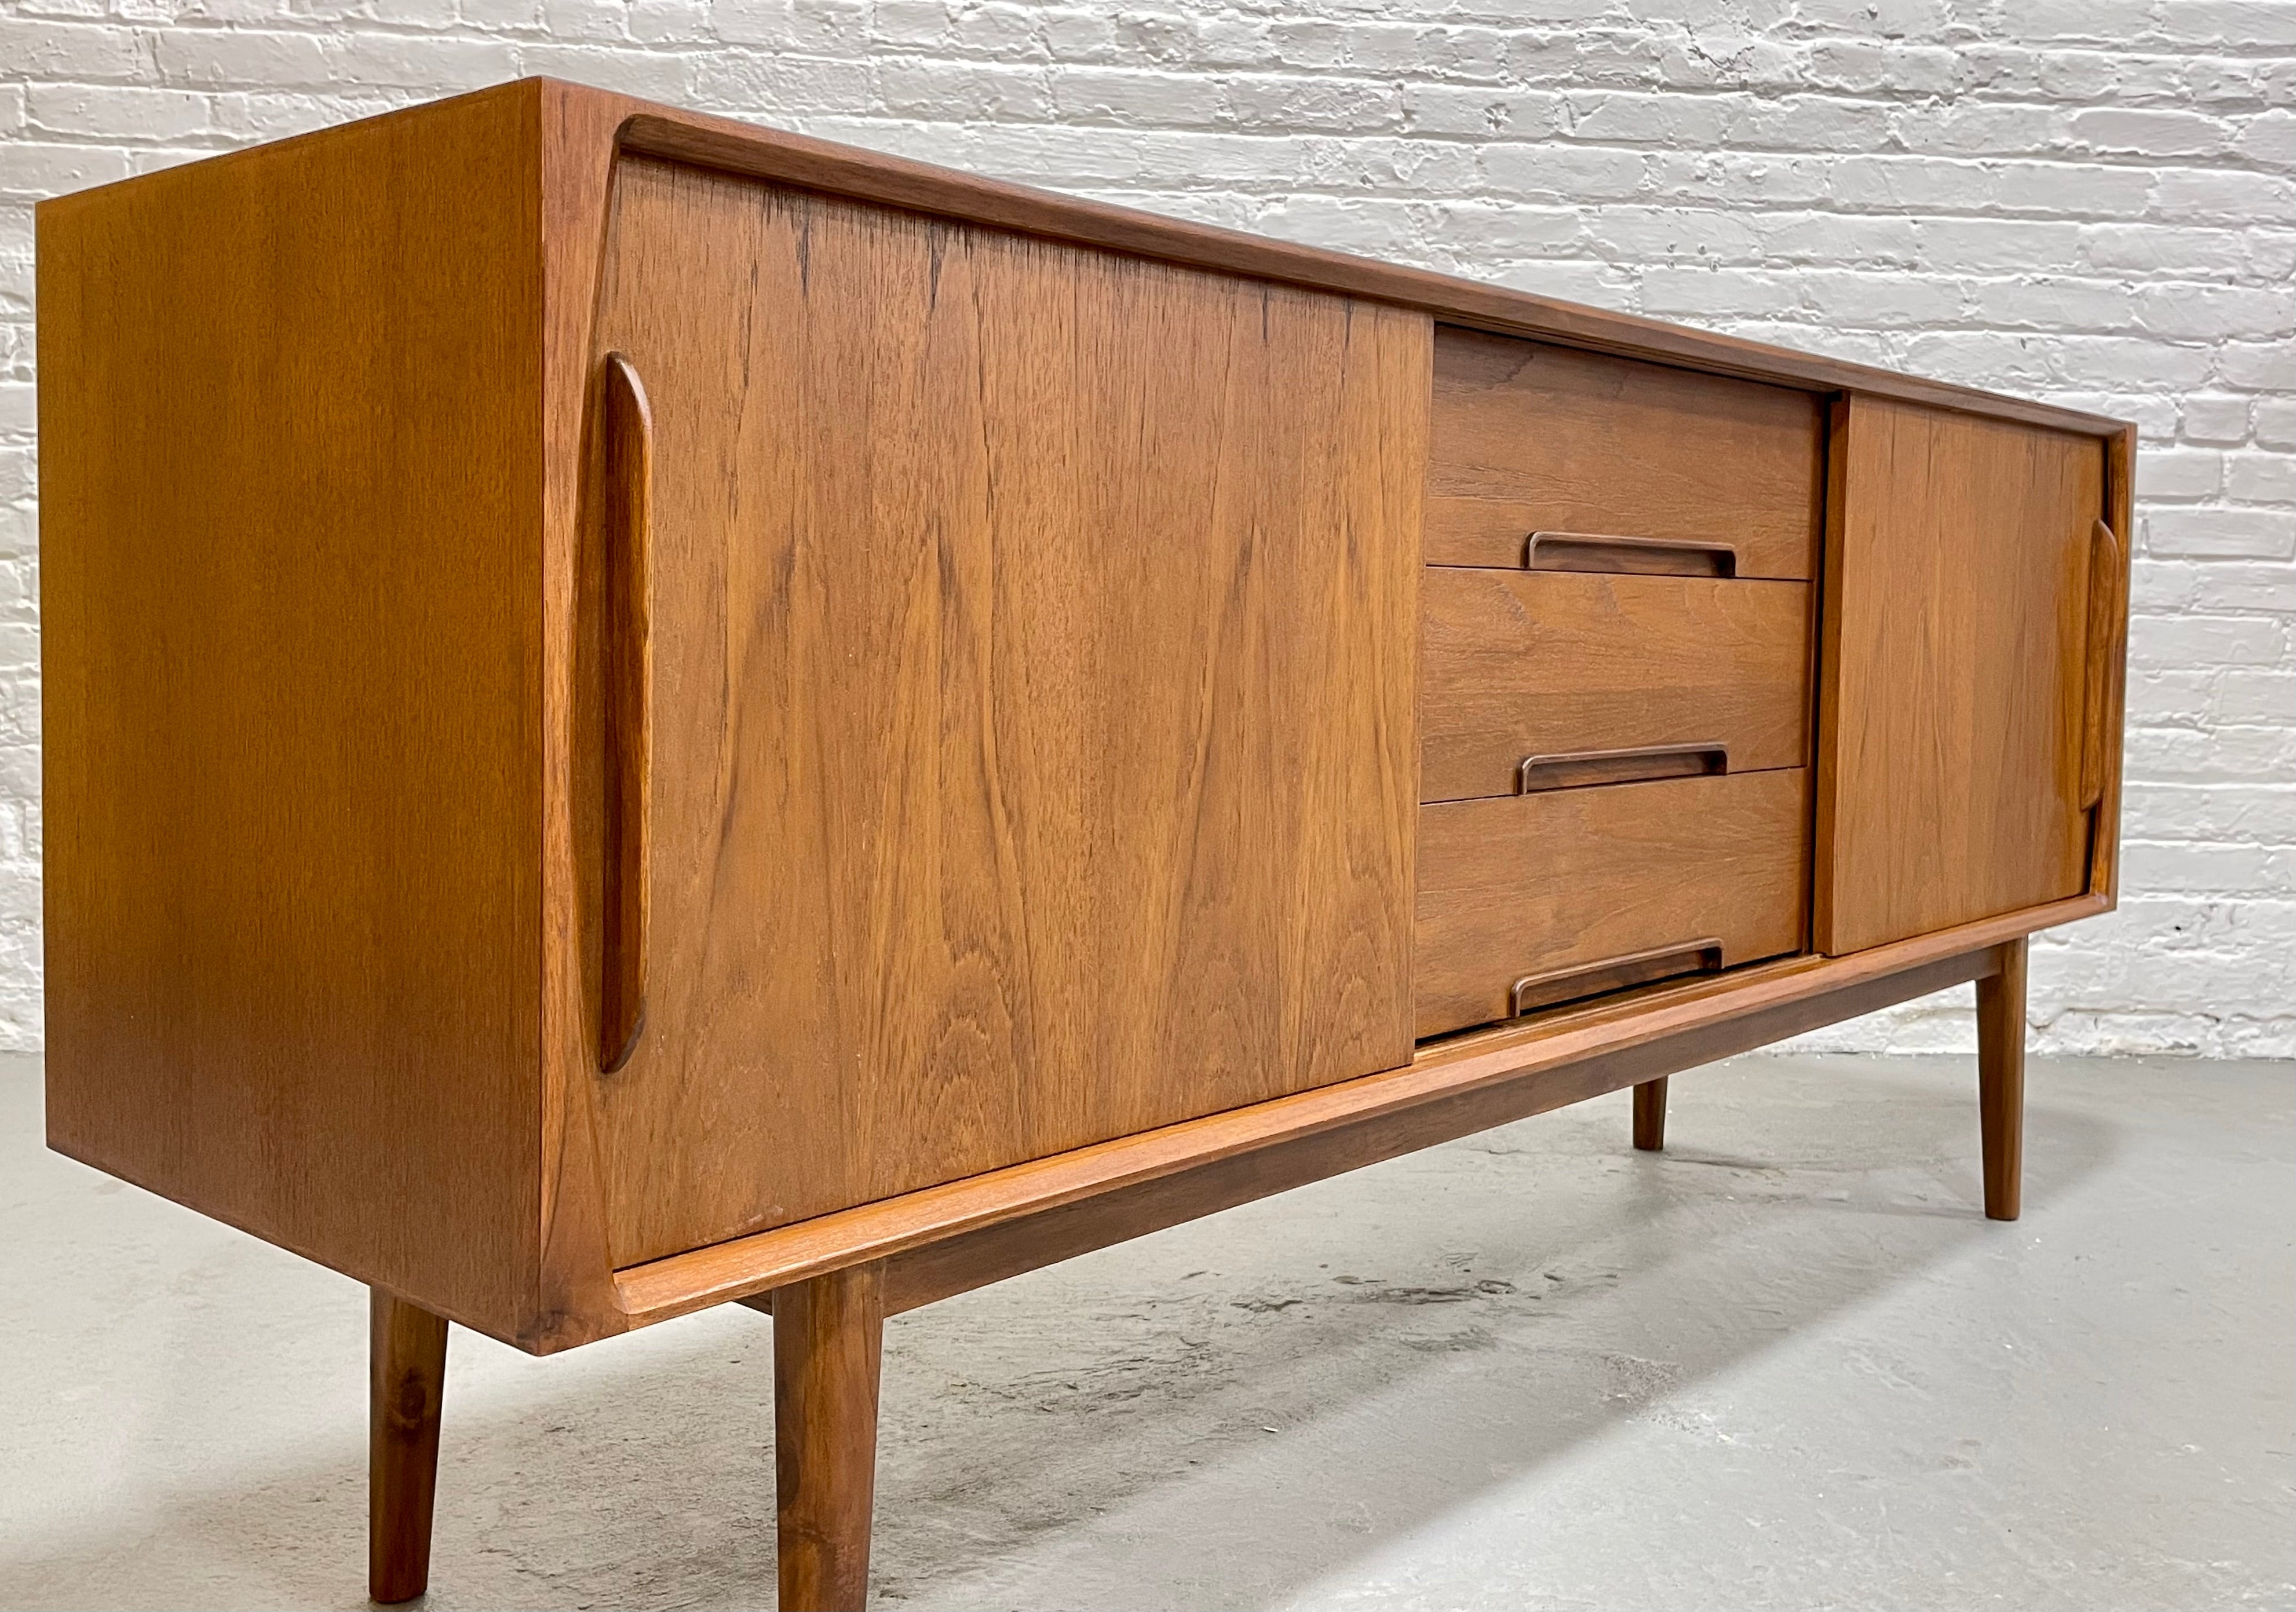 CLASSIC Mid Century MODERN styled Danish CREDENZA / Media Stand / Sideboard